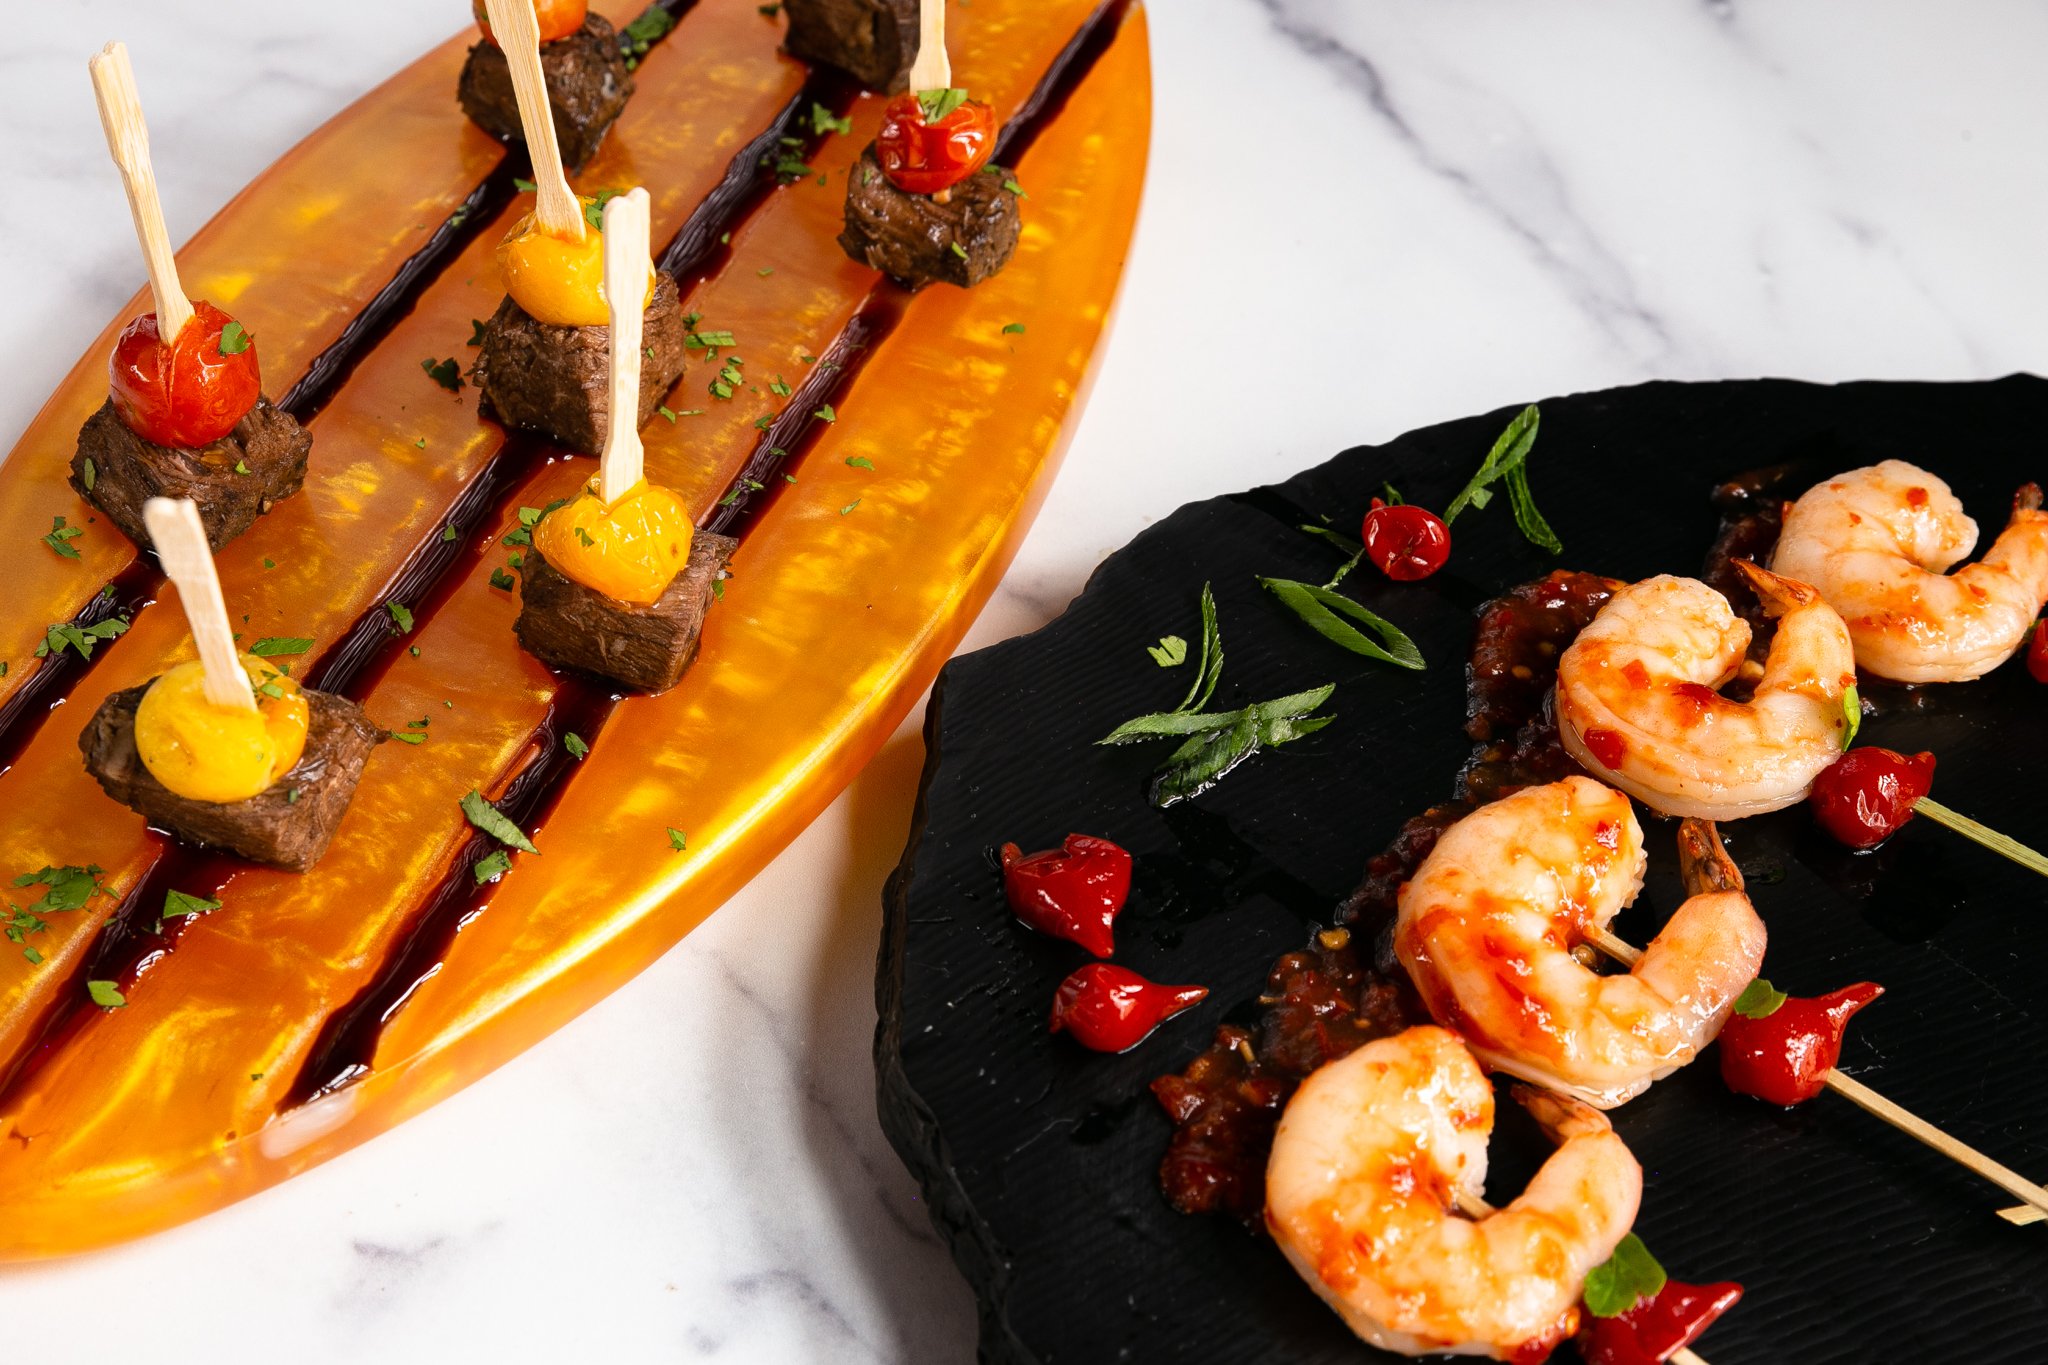  Sesame Shrimp Skewers are lined up and plated on a black serving dish next to Balsamic Beef and Roasted Tomato Skewers, arranged on a long, golden platter. The platters sit on a white marble surface. 